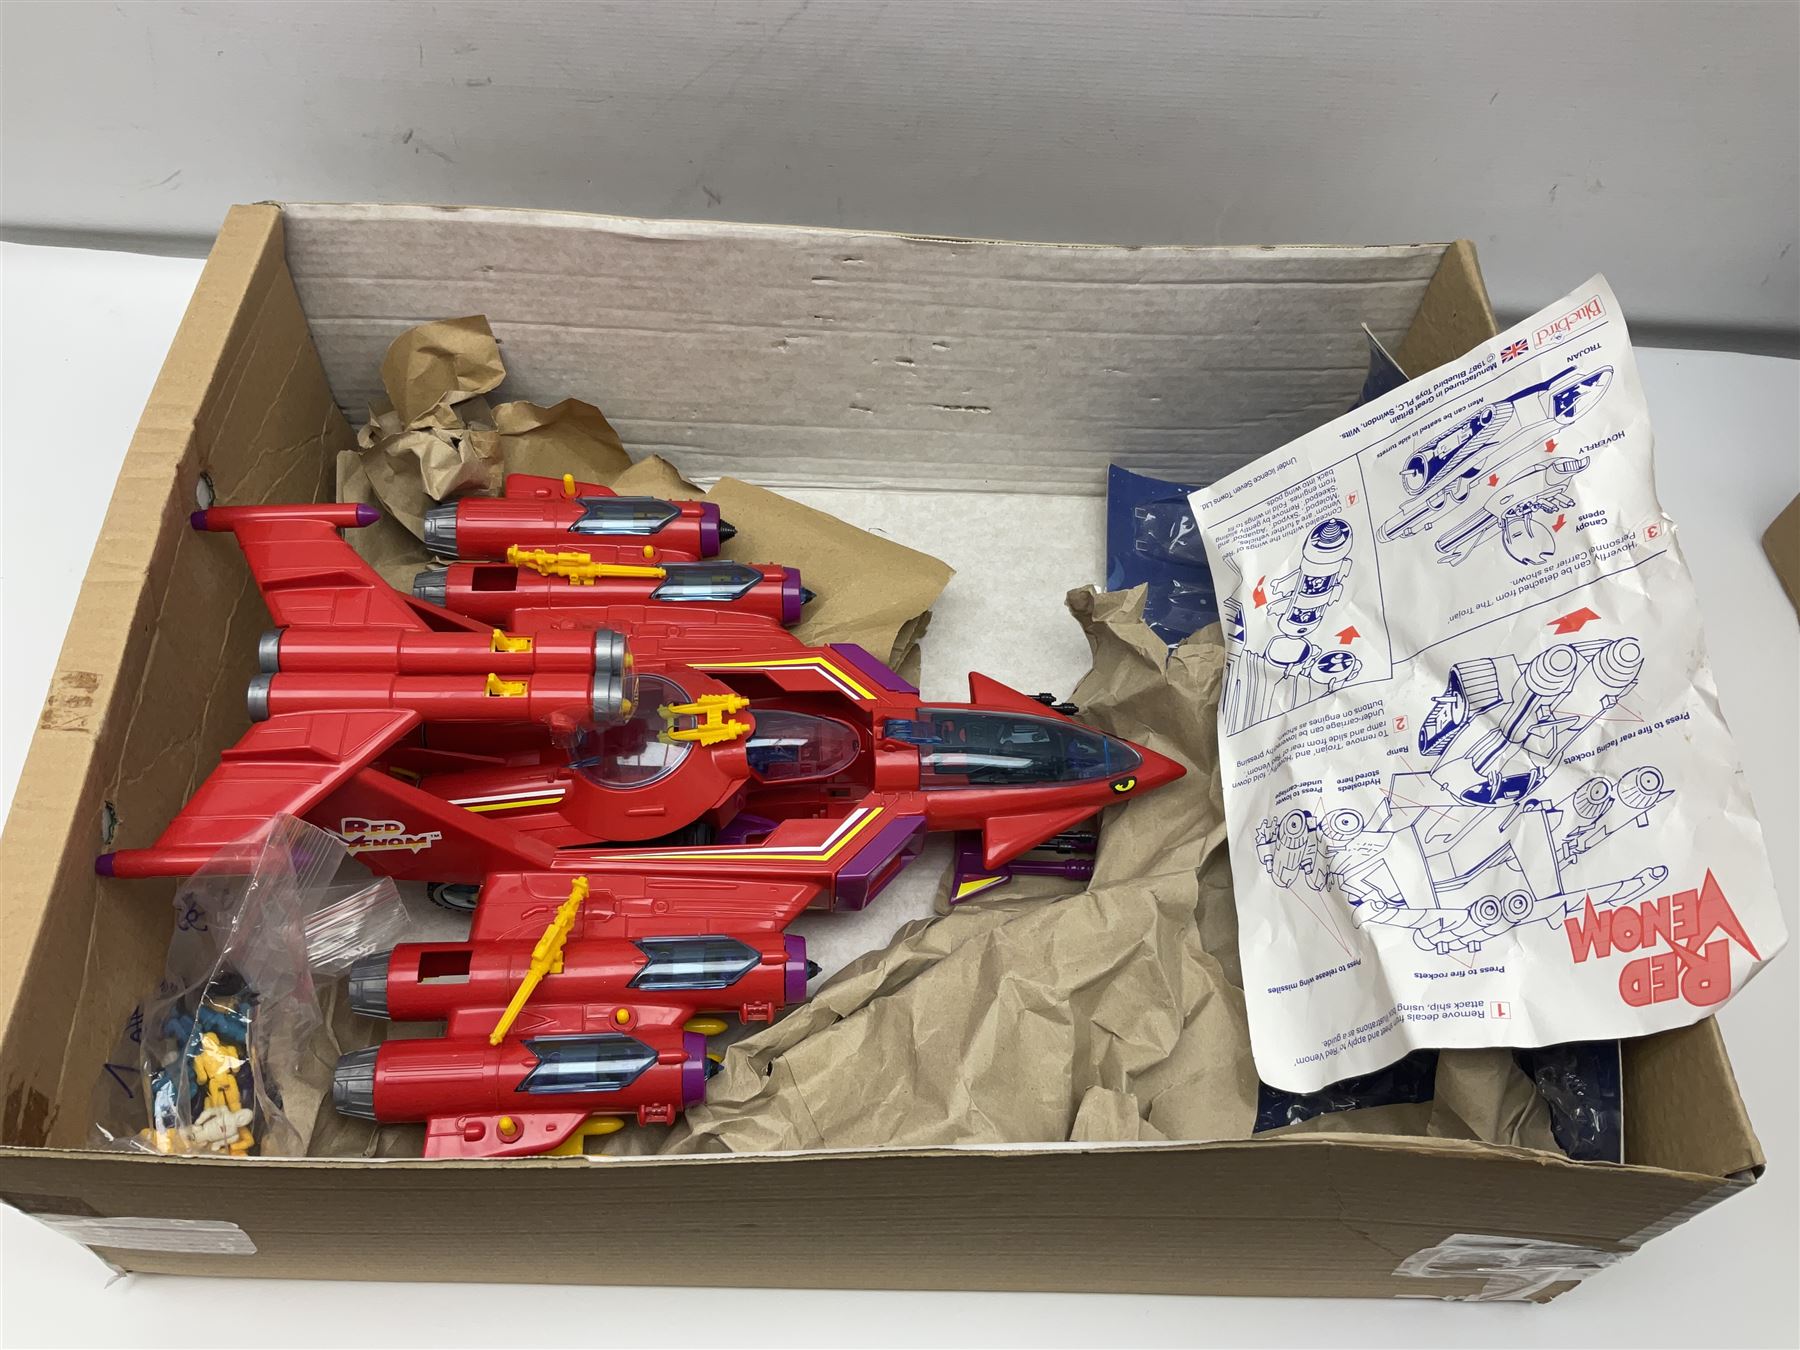 Two 1980s Bluebird Manta Force spaceship playsets - Red Venom and Entire Space Battle Force in one G - Image 2 of 11